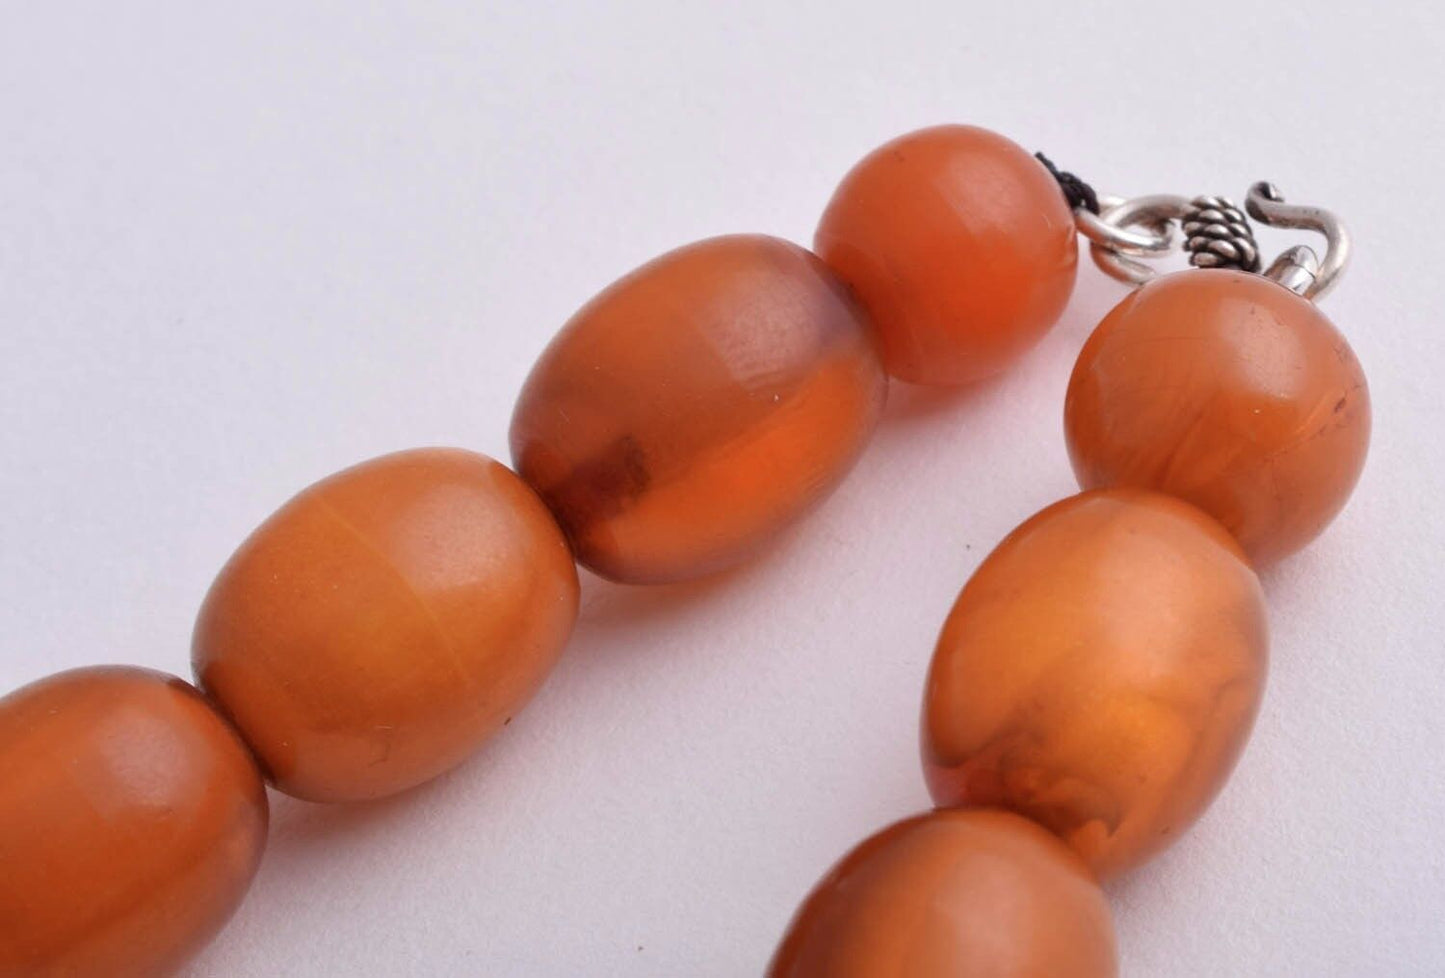 Vintage African Bakelite Amber Trade Beads-Simulated Amber Strand Necklace